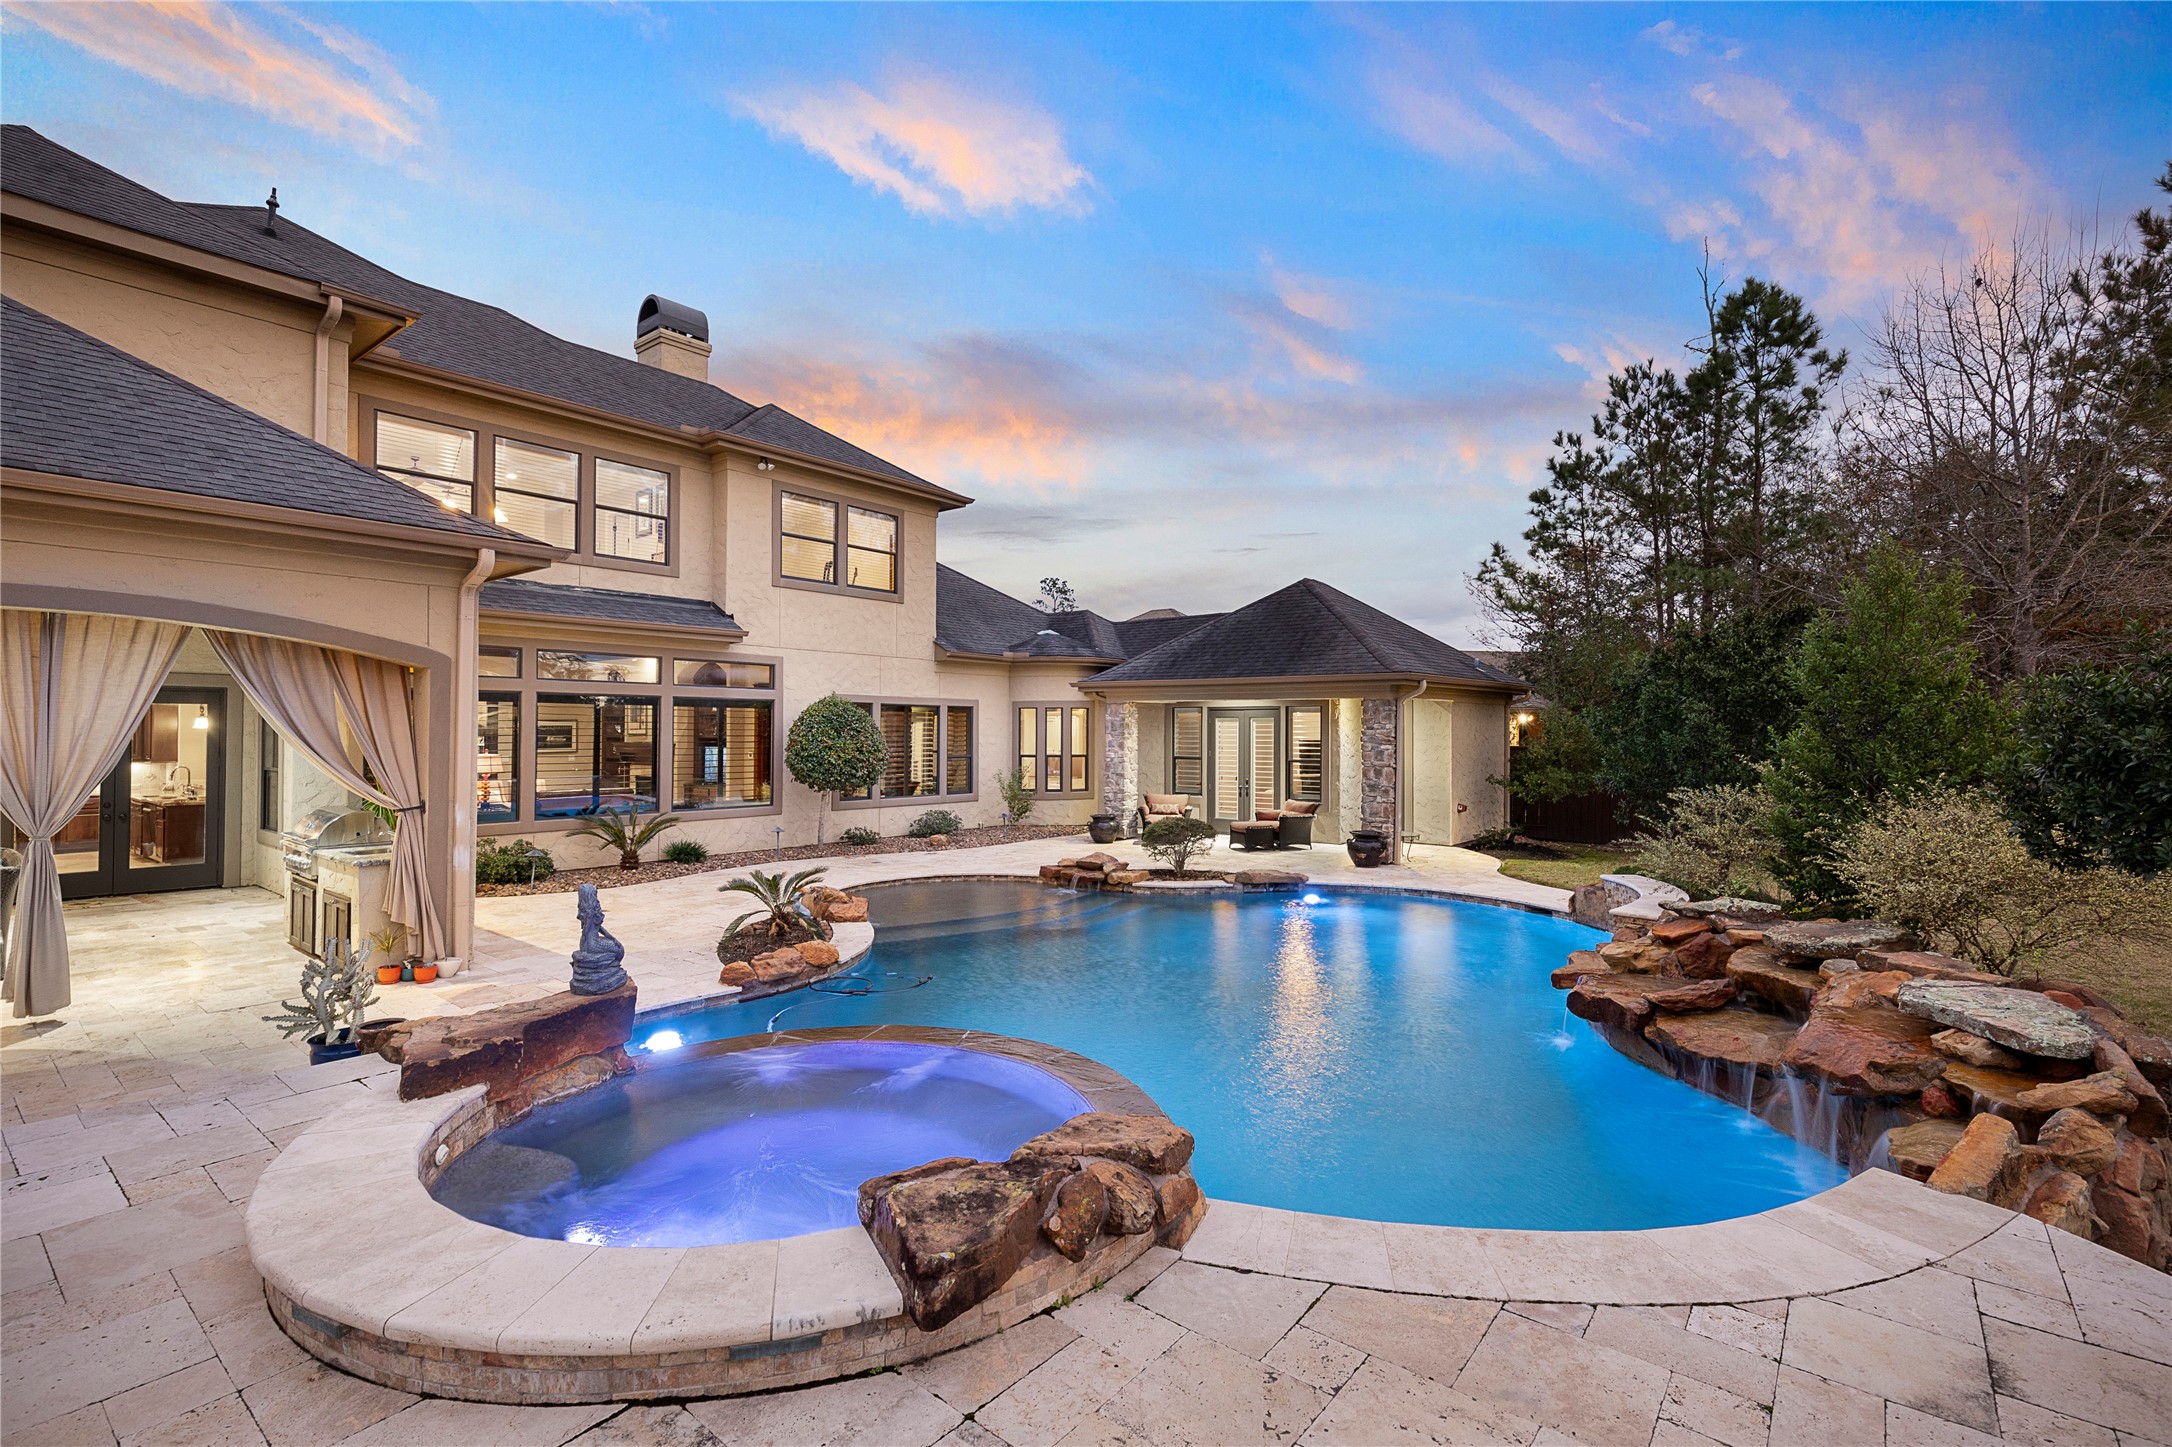 Wow factor galore, this gorgeous custom home provides plenty of private, tranquil, entertaining.